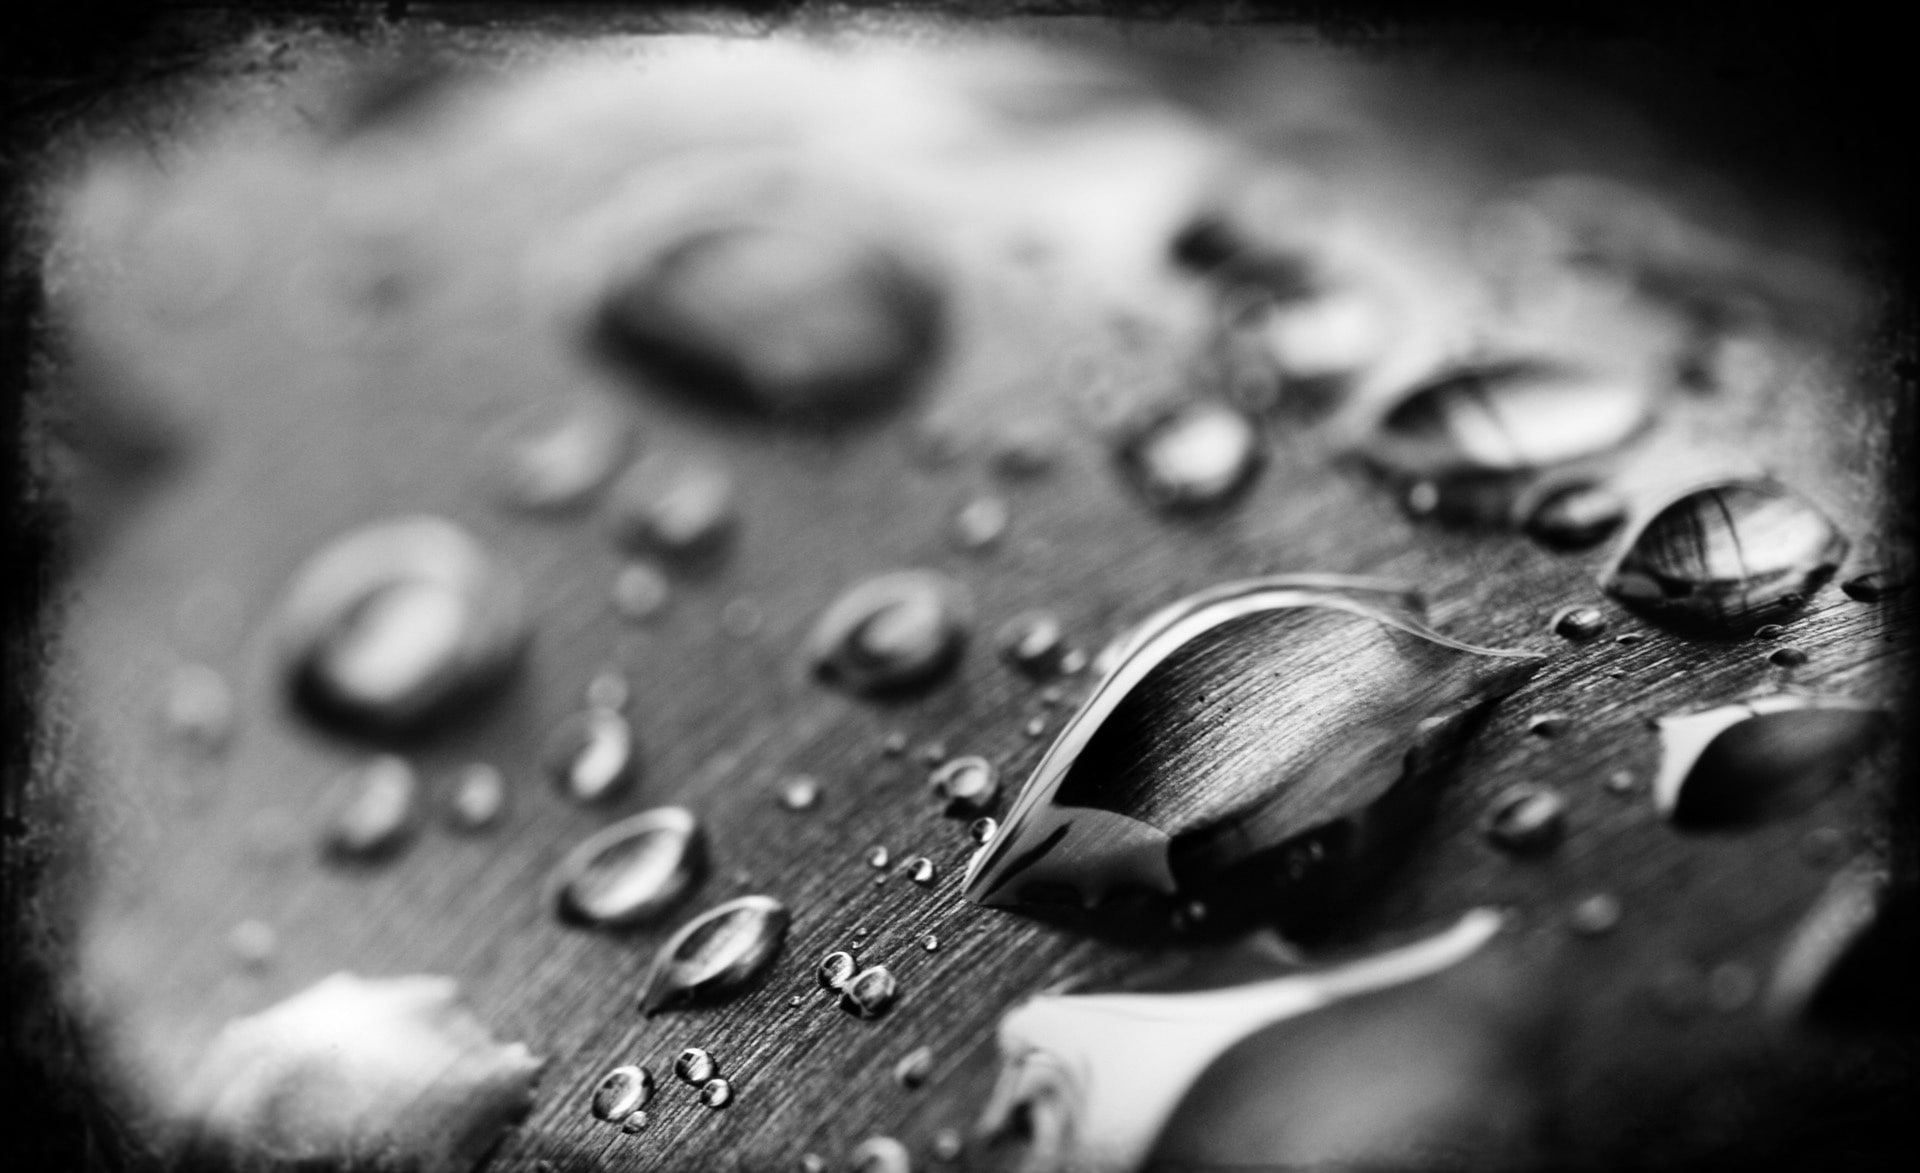 Drops Of Water Black And White, waterdrops grayscale photo, Aero